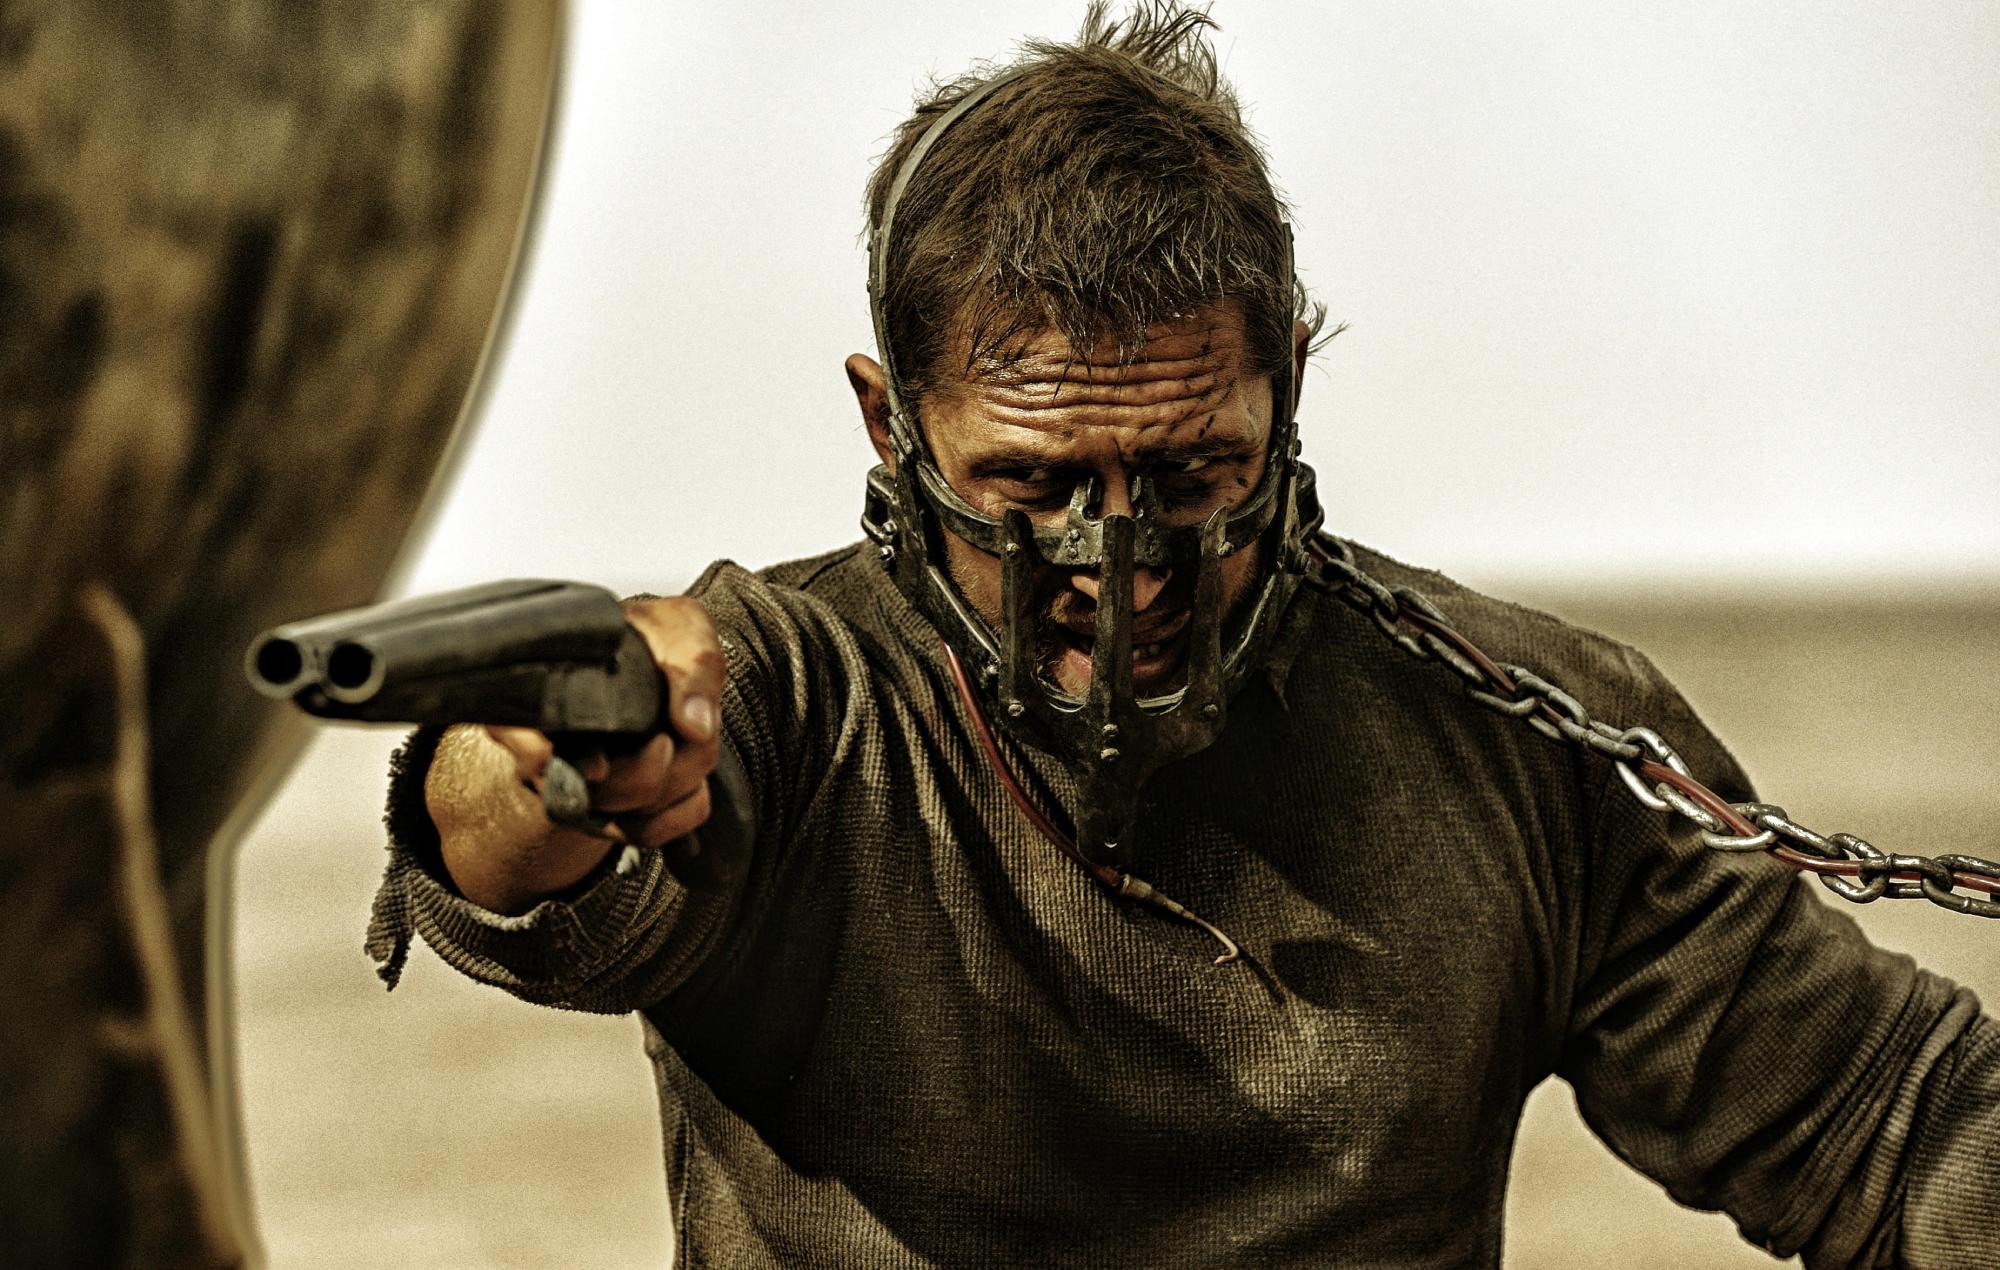 PMBMX2 TOM HARDY as Max Rockatansky in Warner Bros. Pictures' and Village Roadshow Pictures' action adventure "MAD MAX: FURY ROAD," a Warner Bros. Pictures release.